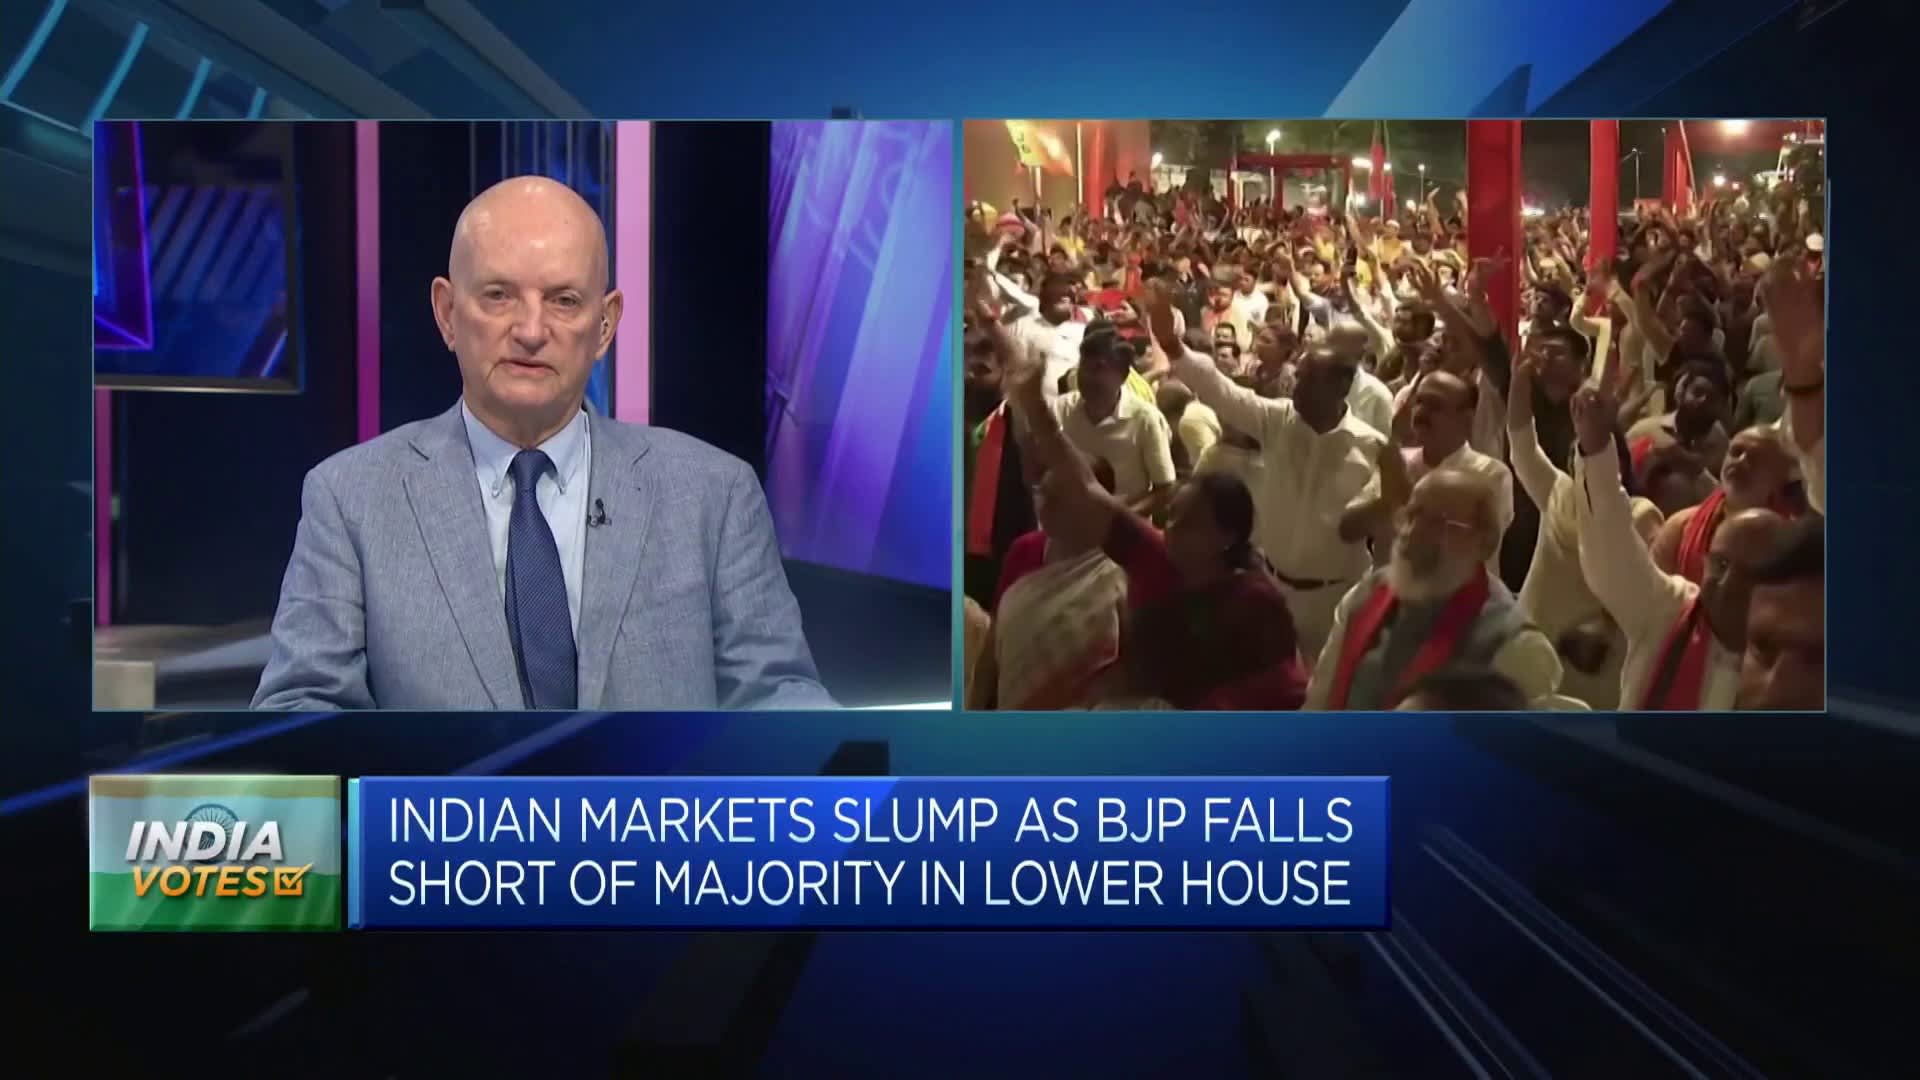 India elections: There's still 'a hell of a lot' of optimism in Indian assets, says David Roche